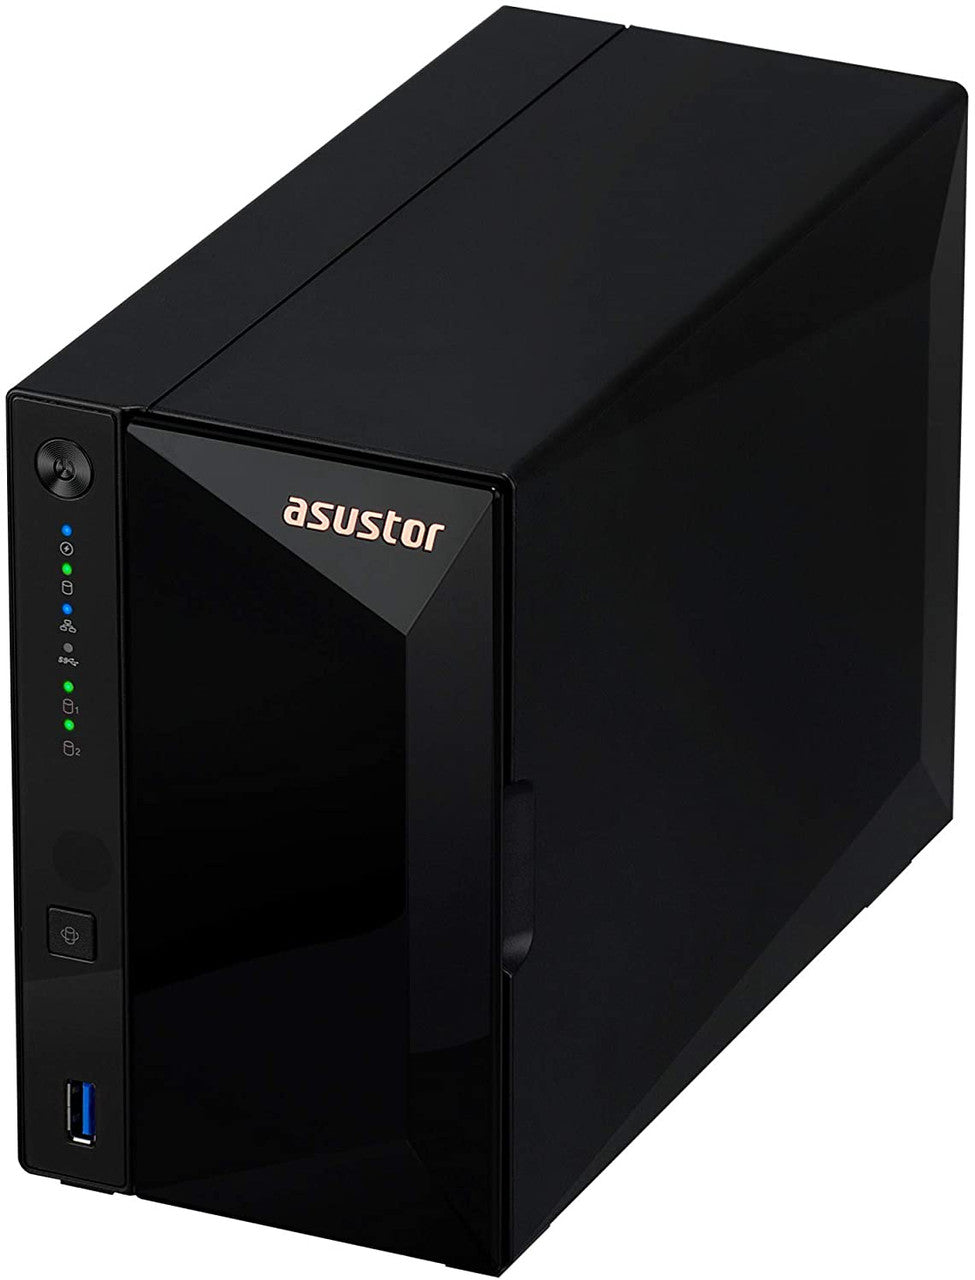 Asustor AS3302T 2-Bay Drivestor 2 PRO NAS with 2GB RAM and 6TB (2x3TB) Seagate Ironwolf NAS Drives Fully Assembled and Tested